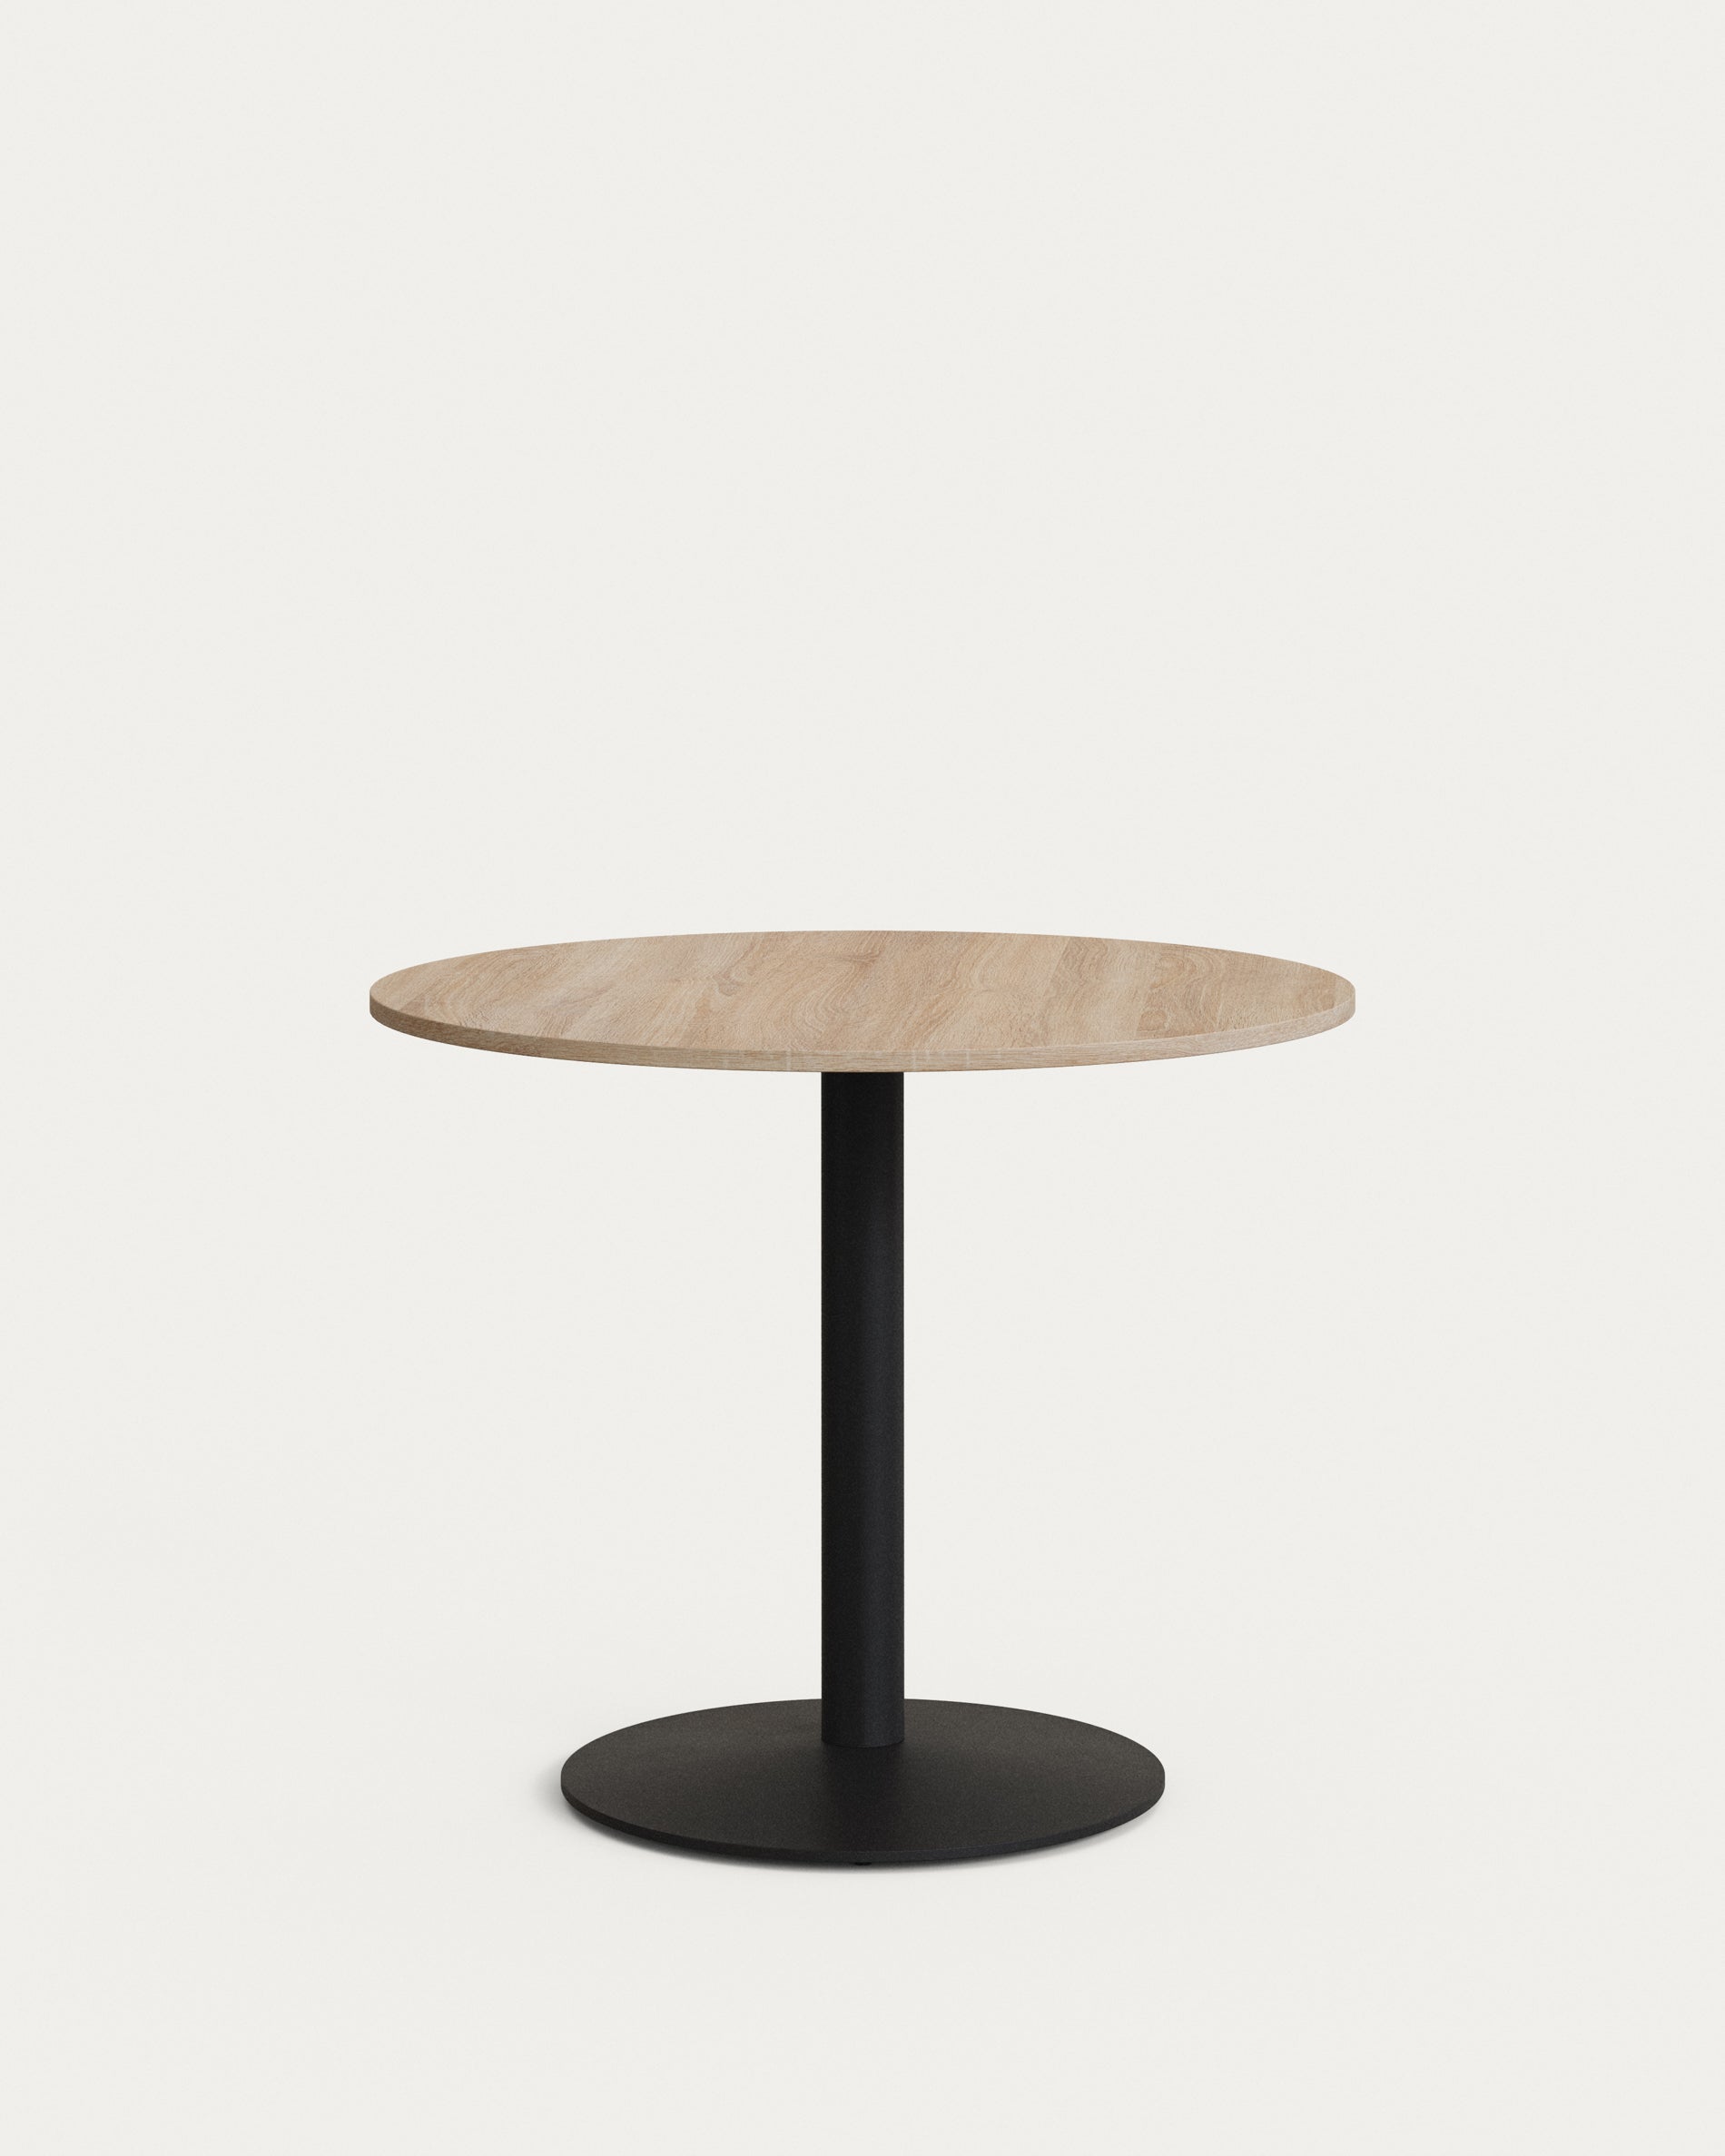 Tiaret round table with natural melamine finish and painted black metal legs, Ø90x70cm